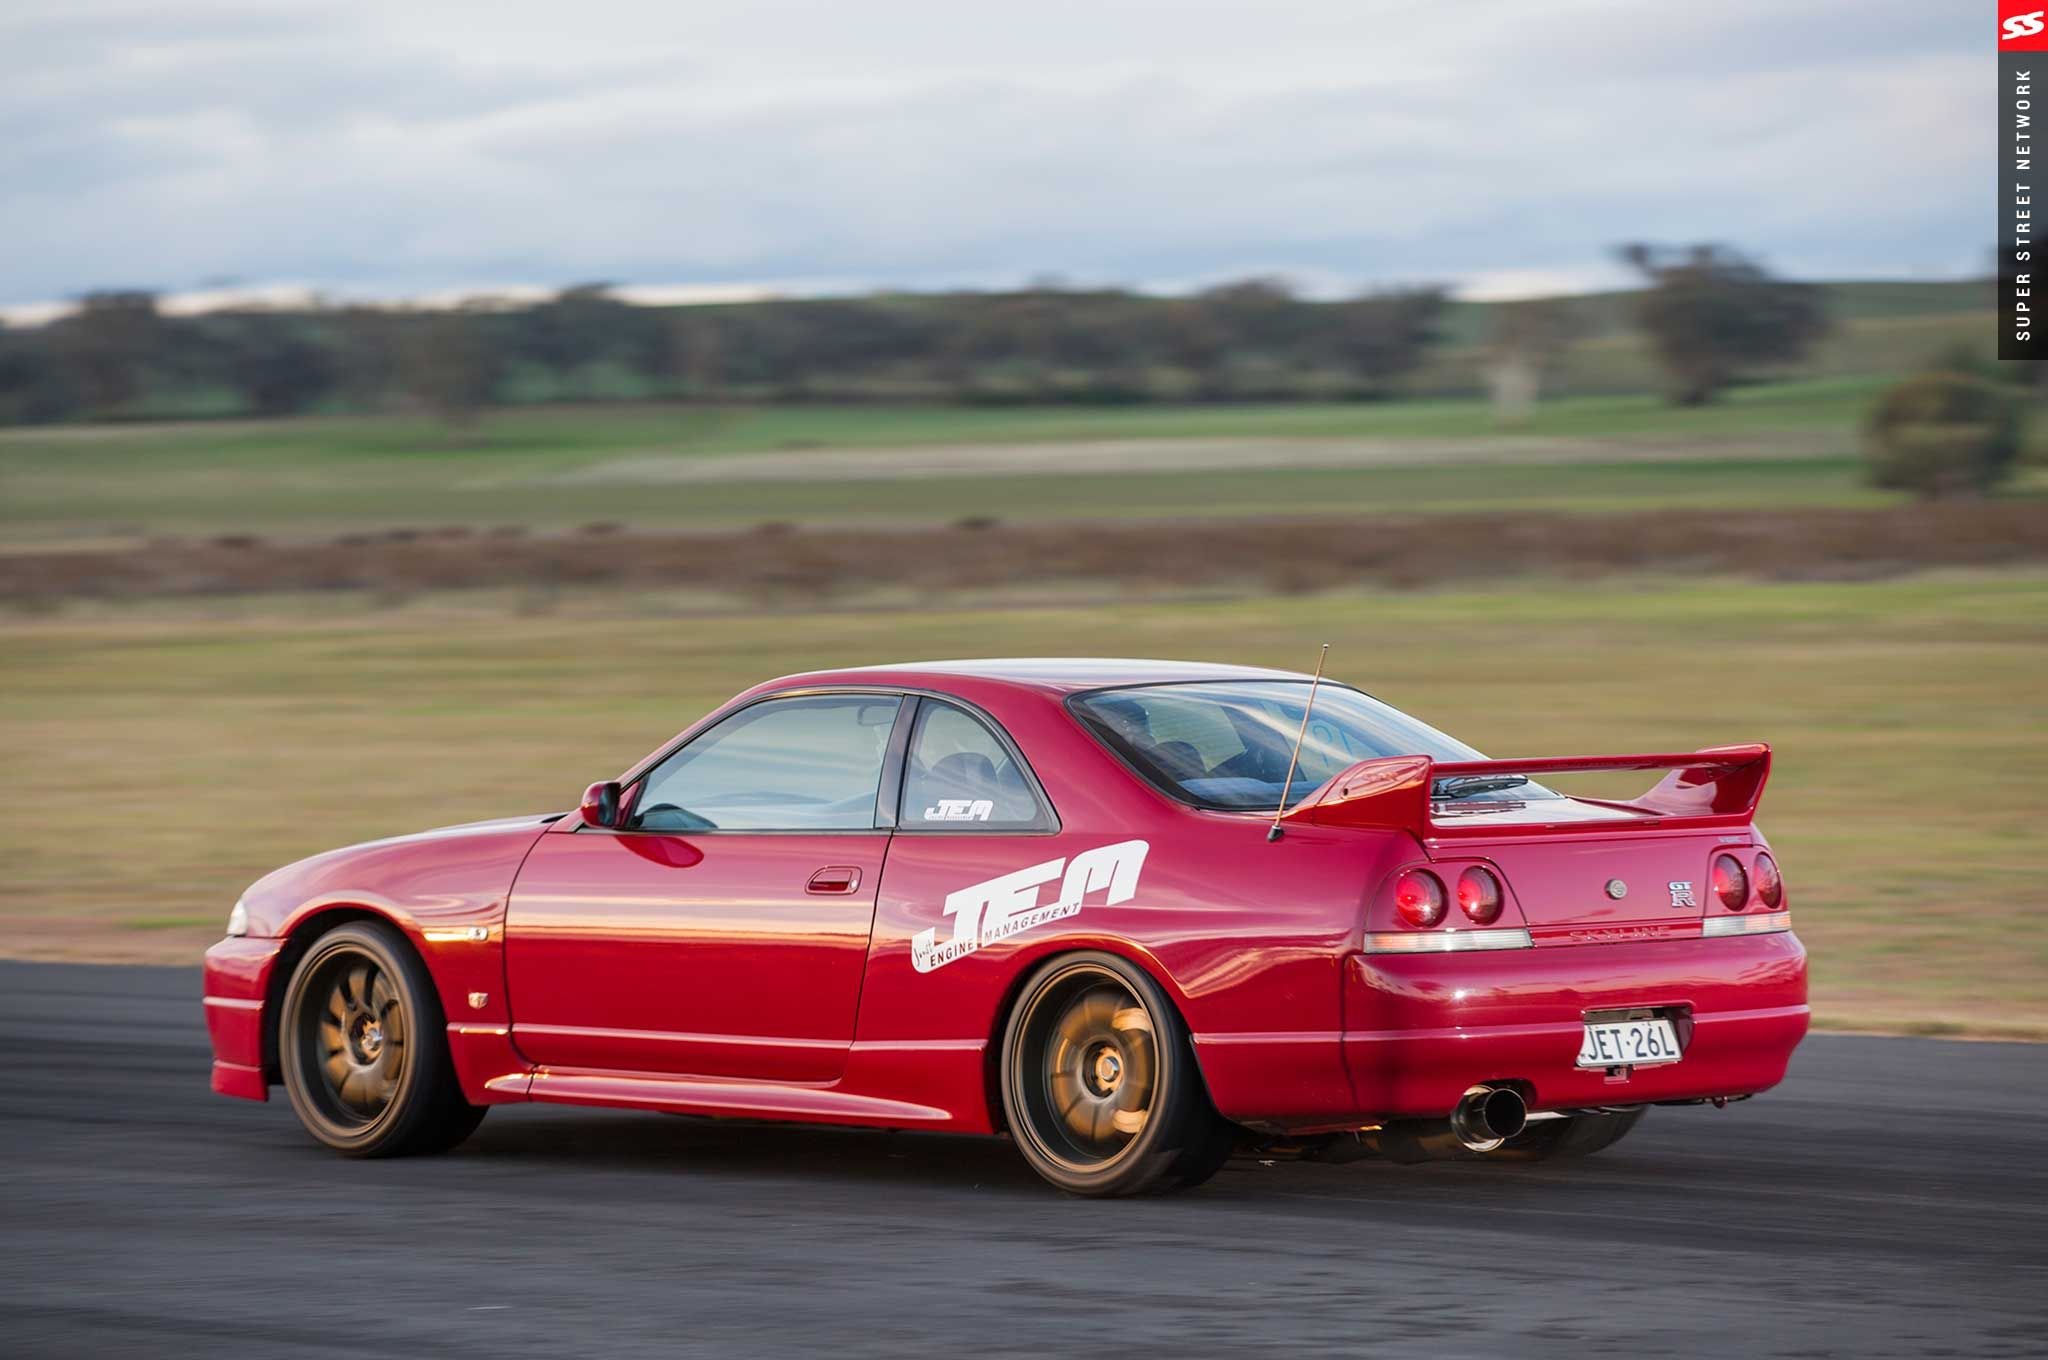 1998, Nissan, Skyline, Gt r, R33, Red, Modified, Cars Wallpaper